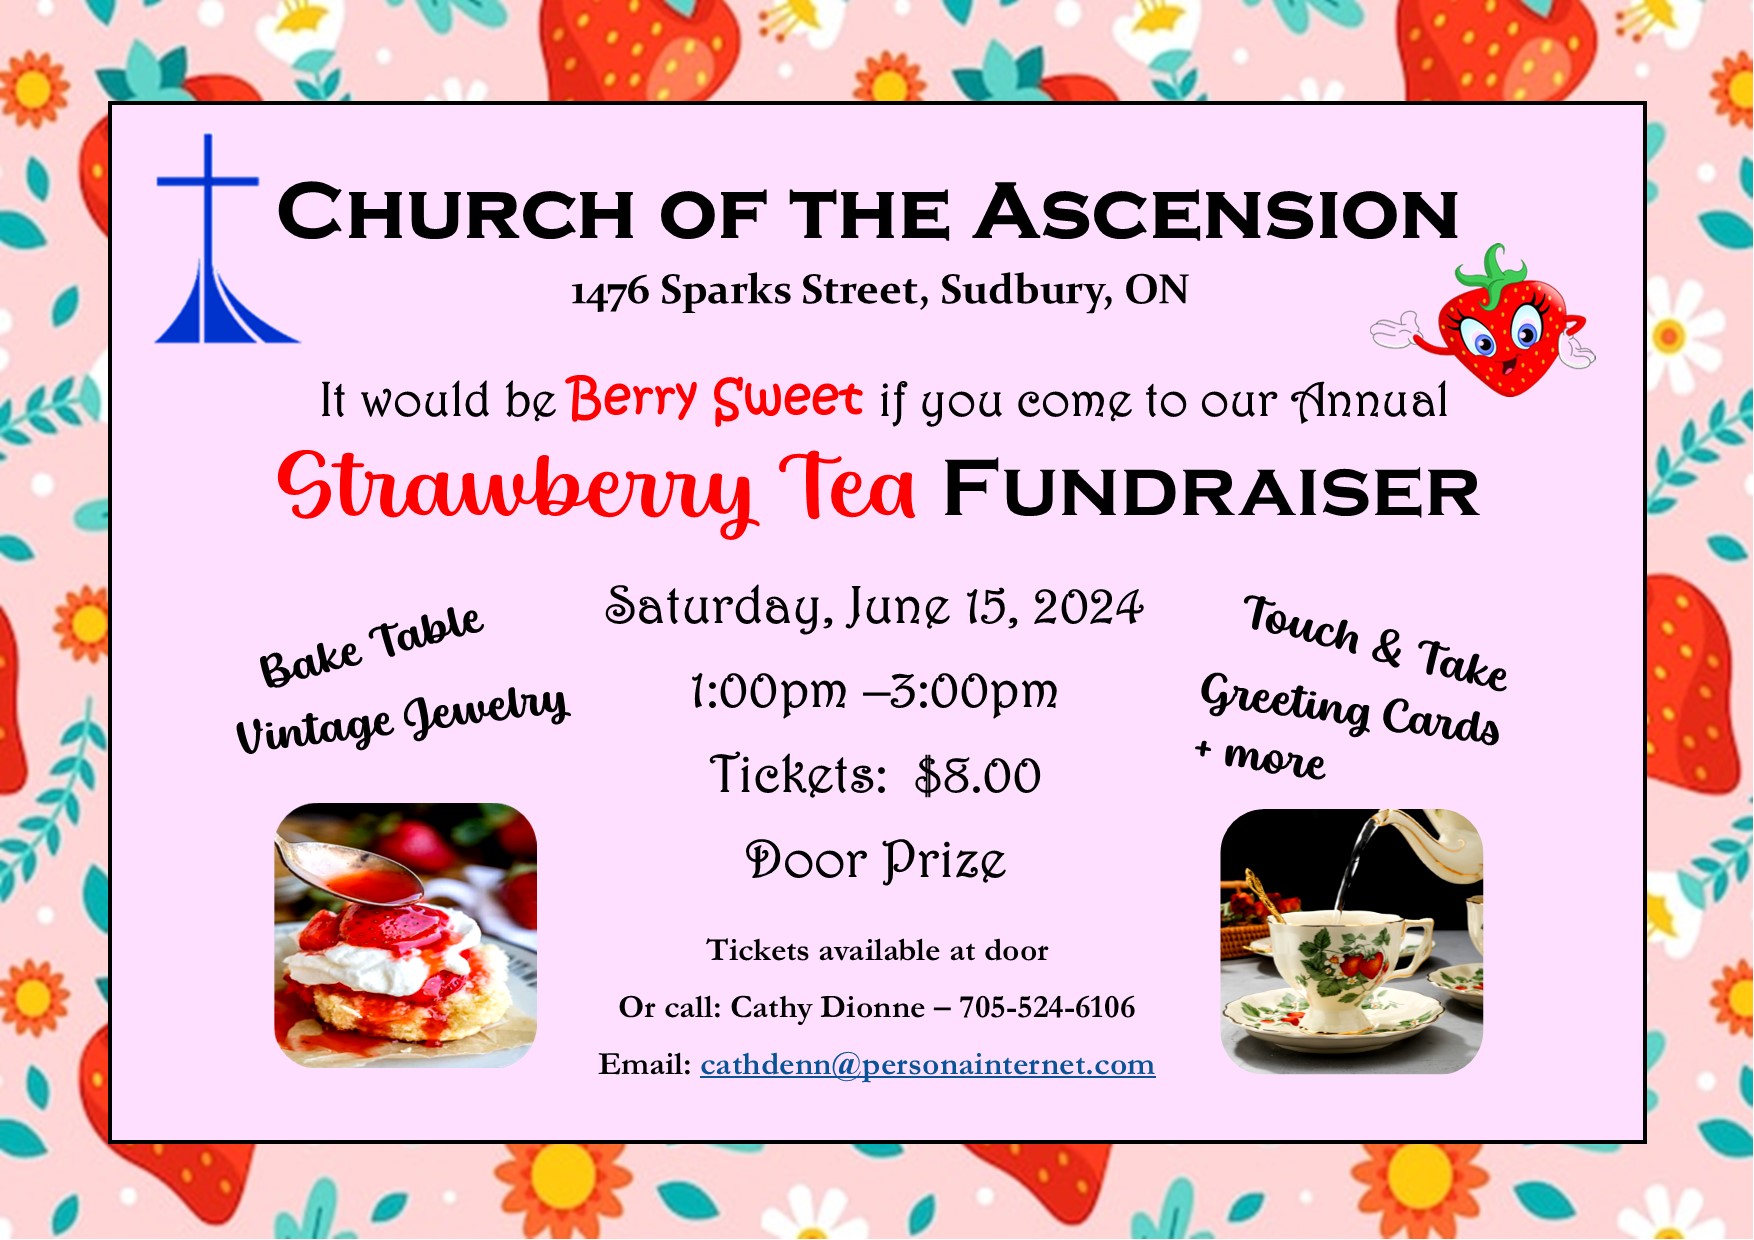 Church of the Ascension Strawberry Tea @ Church of the Ascension